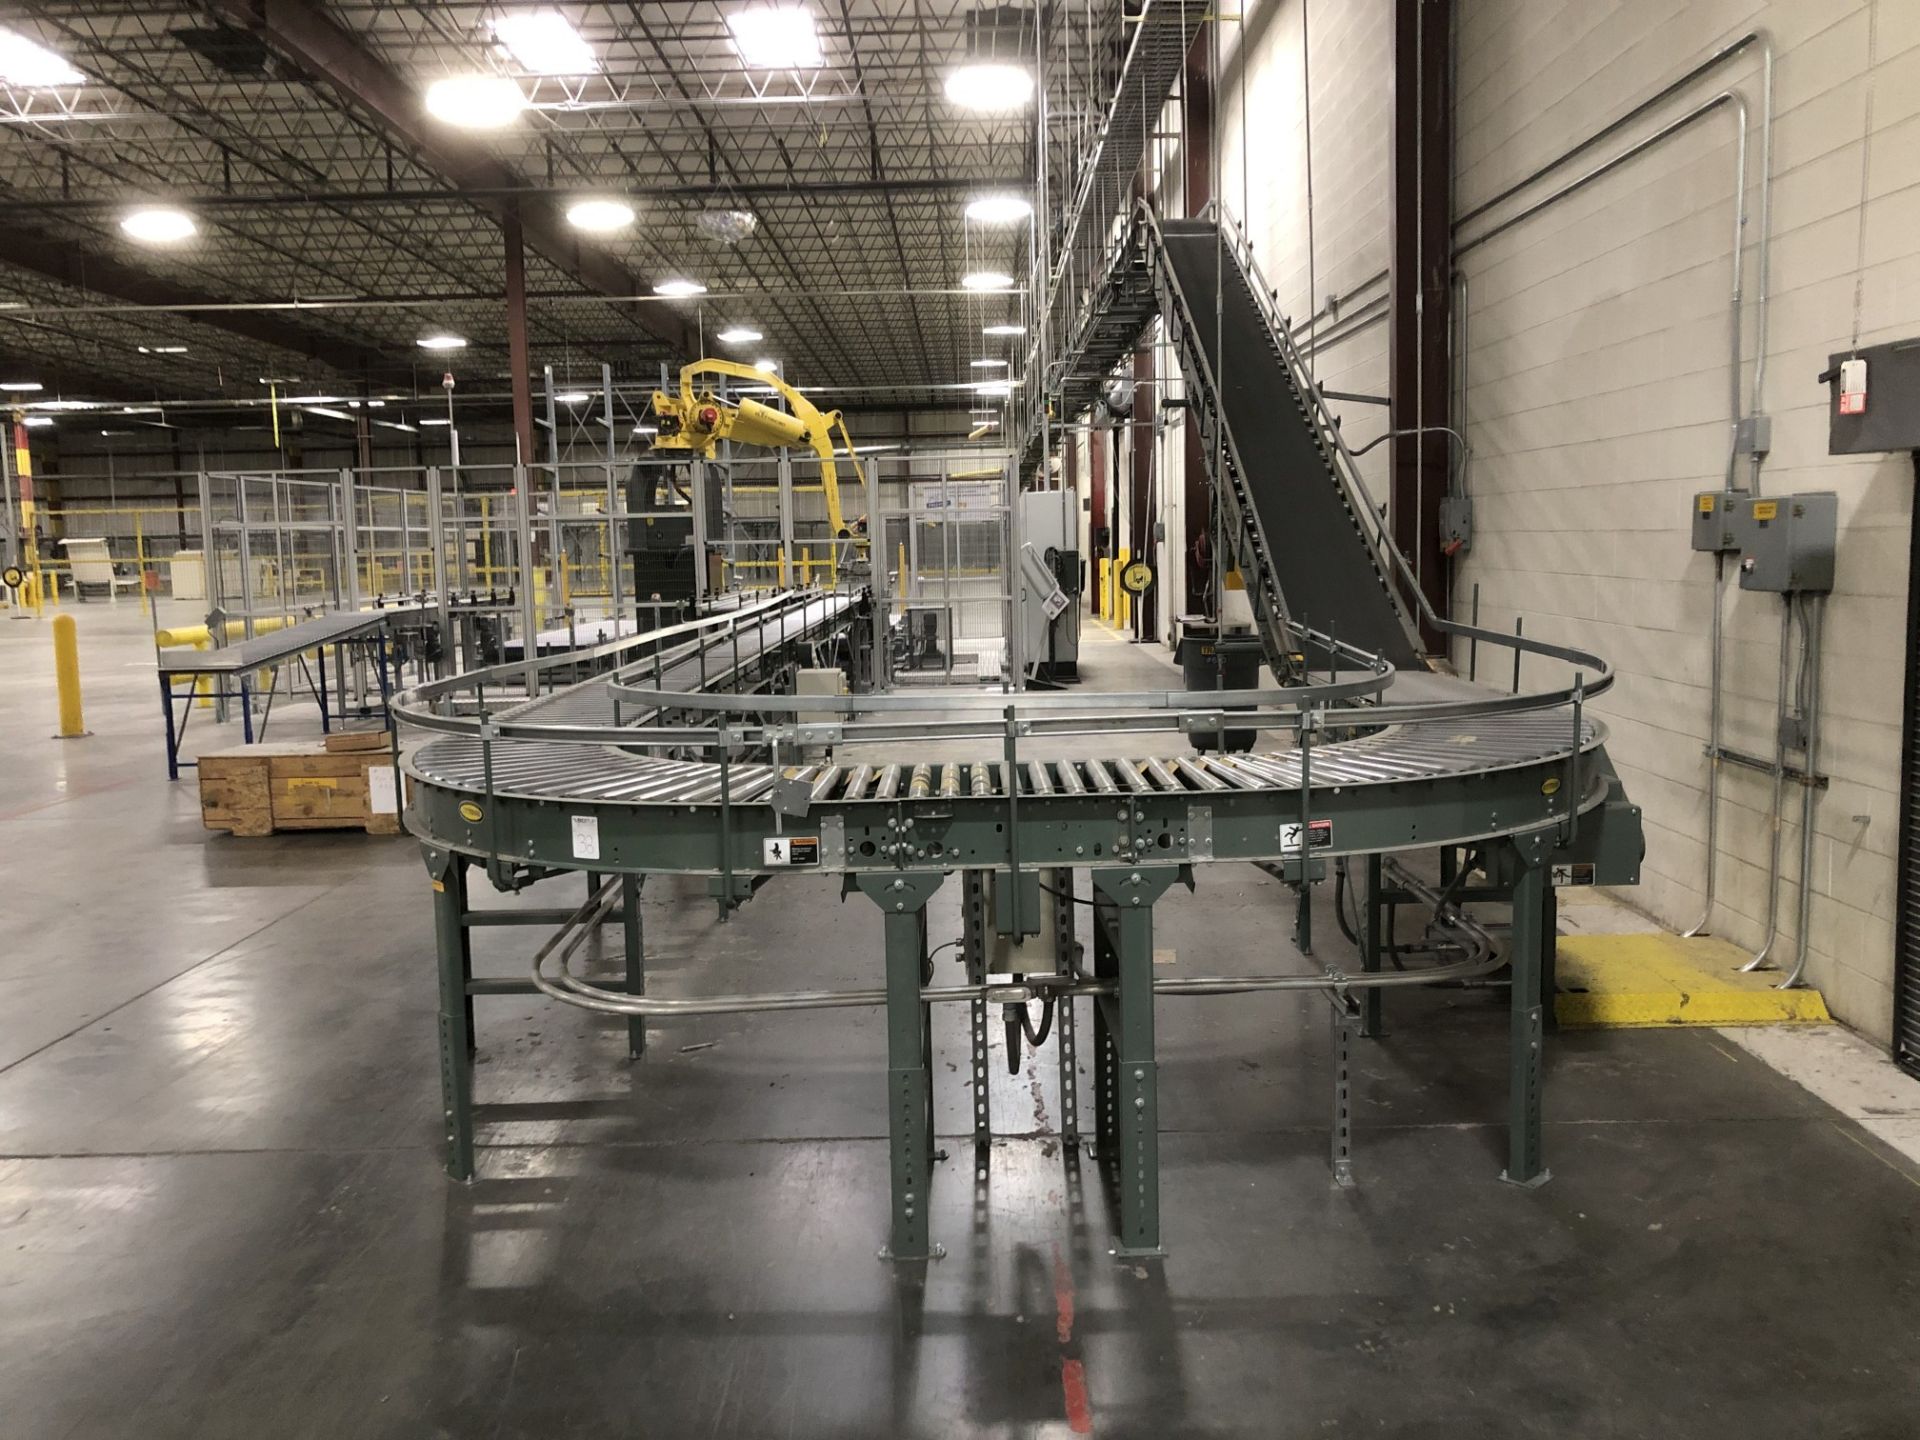 All Hytrol Conveyor Throughout Entire Site, Mostly 20" Wide Powered Roller Conveyor [Please - Image 26 of 80